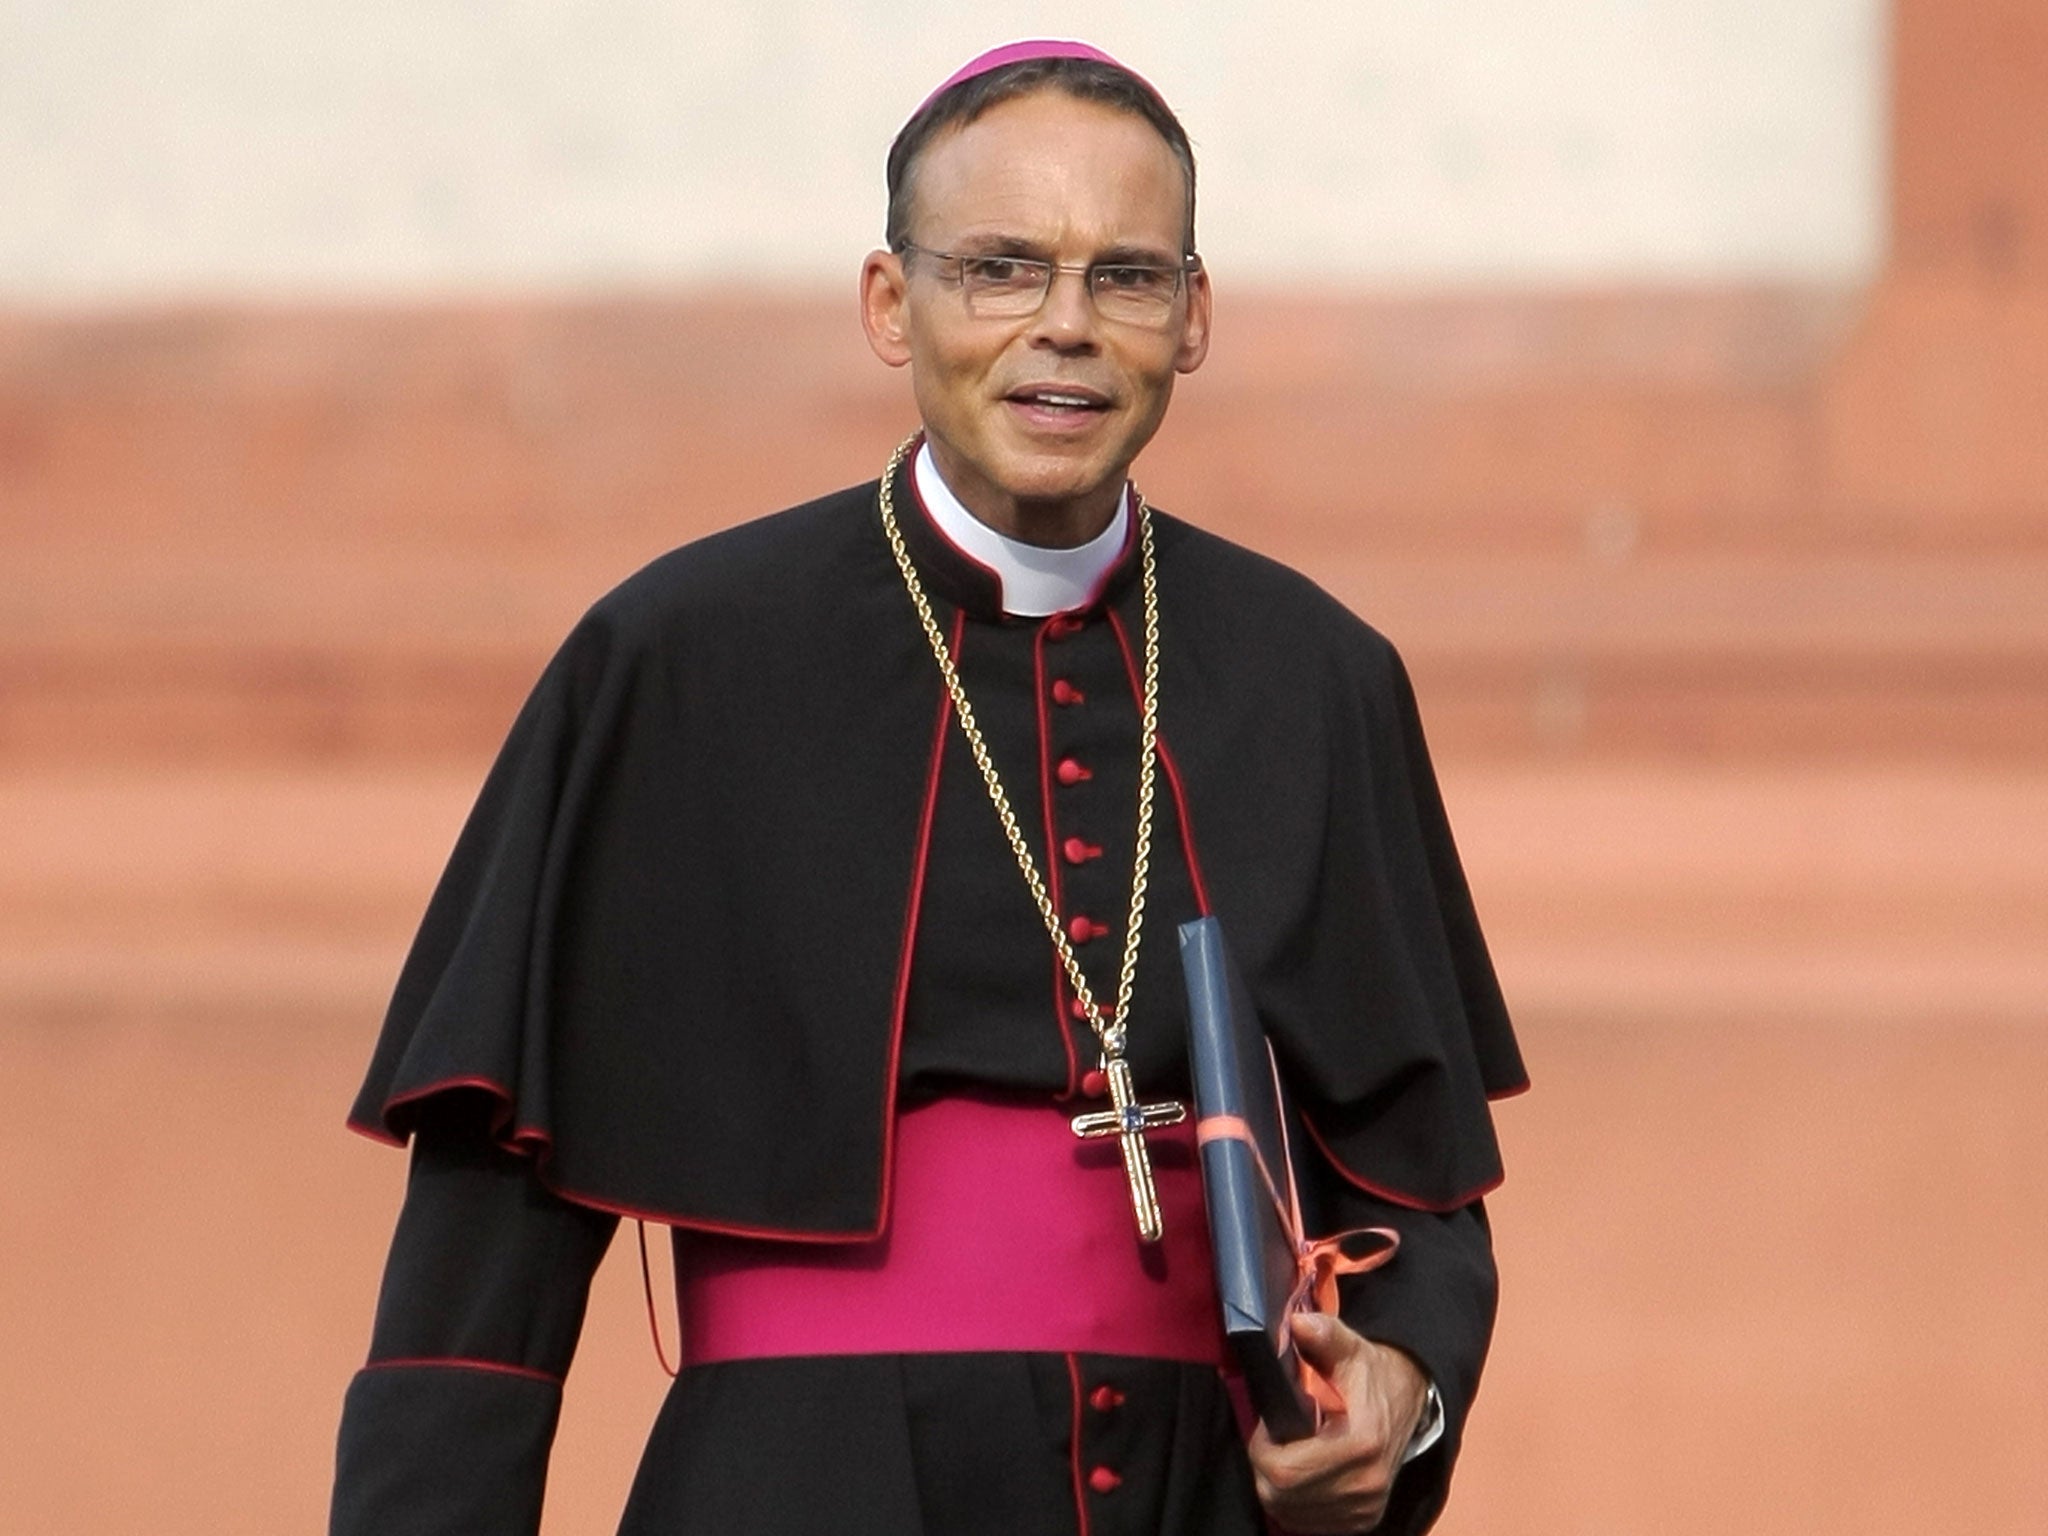 Bishop Franz Peter Tebartz-van Elst was formally suspended amid accusations that he had spent over €31m (£26.5m) on renovating his official residence in Limburg